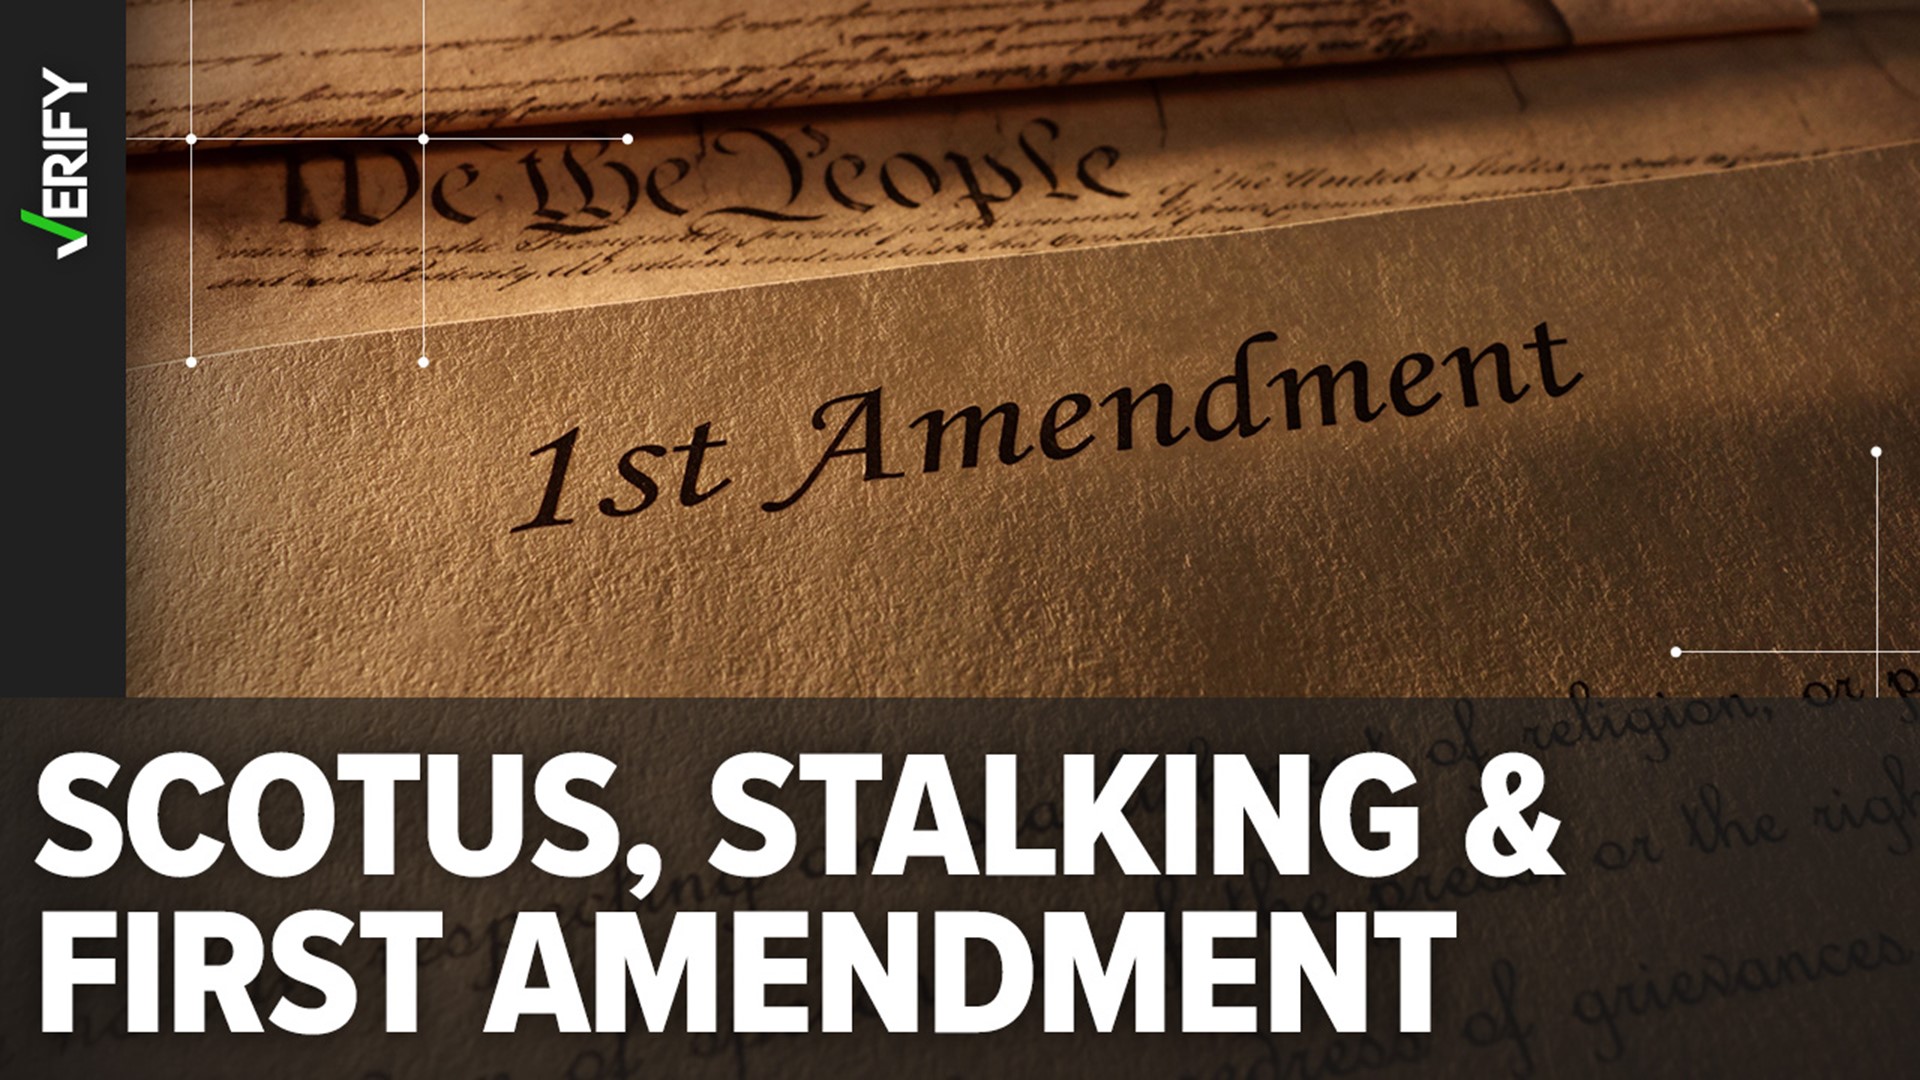 The Supreme Court ruling raises the threshold to prosecute stalking or threatening cases, but it doesn't say that stalking is protected by the First Amendment.